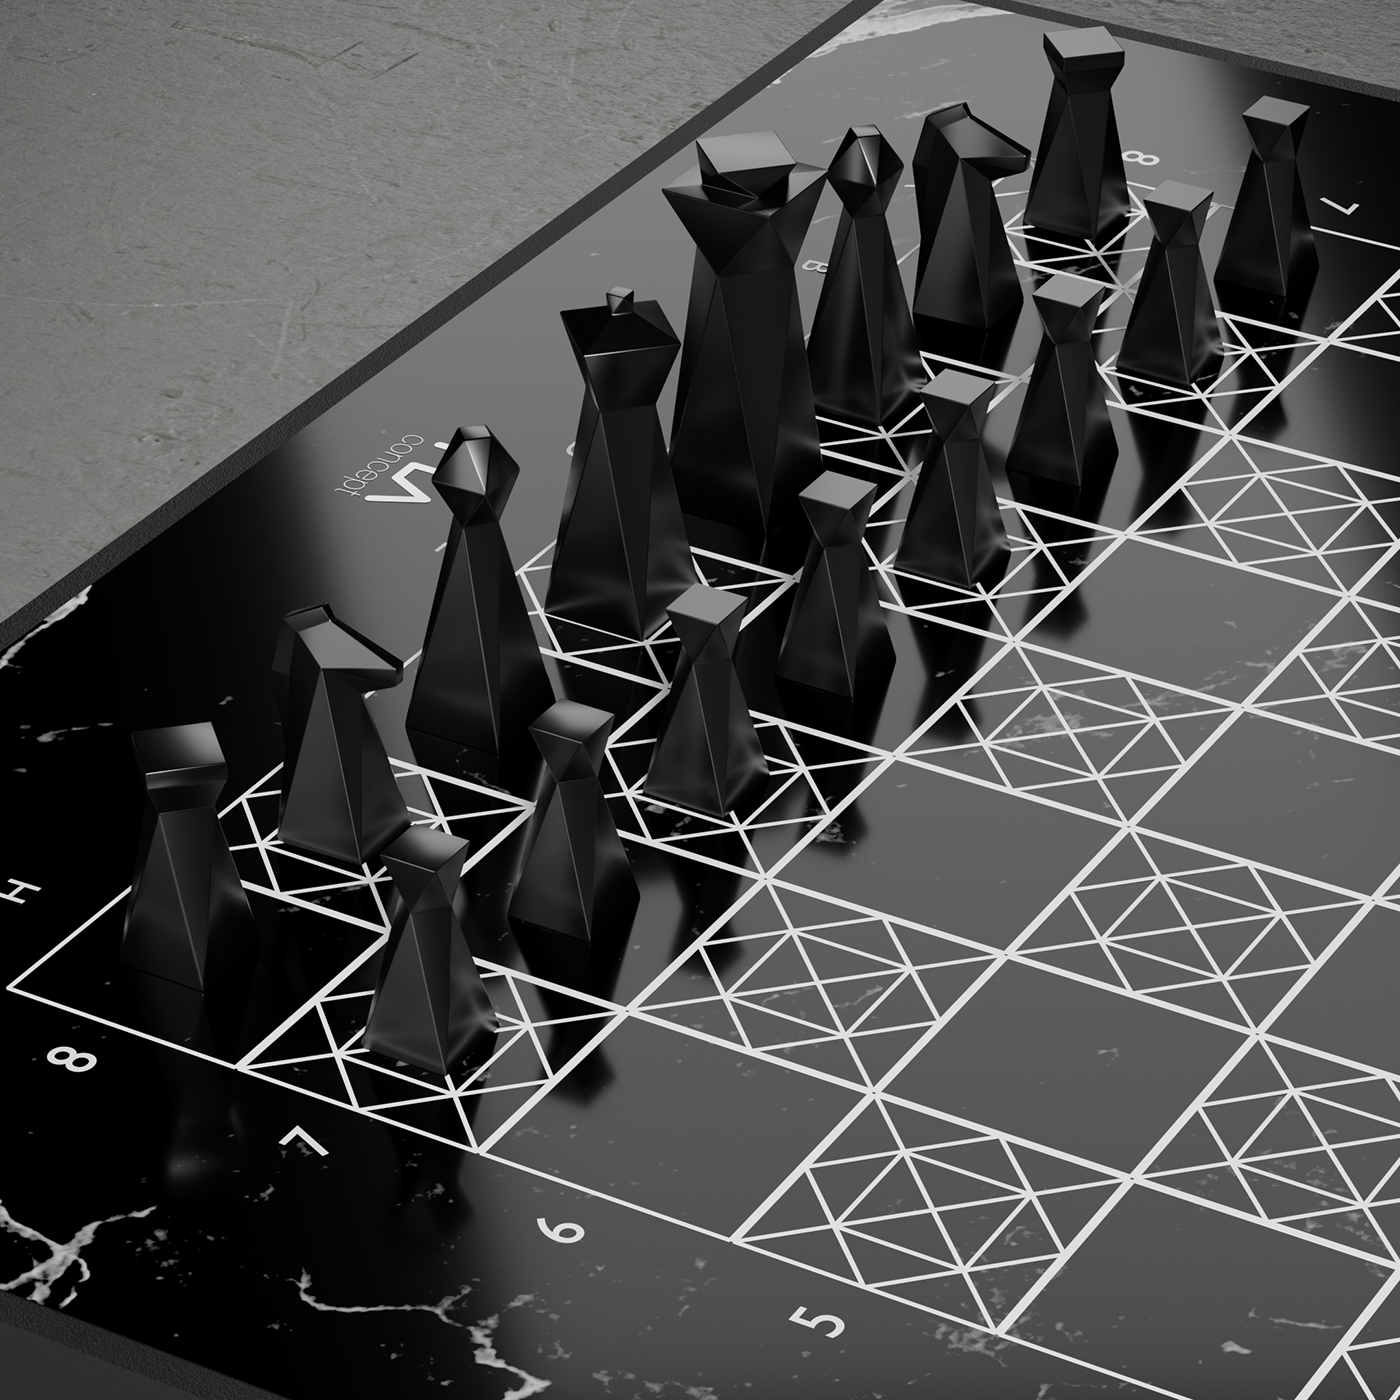 3D chess set chessboard product design  Render visualization